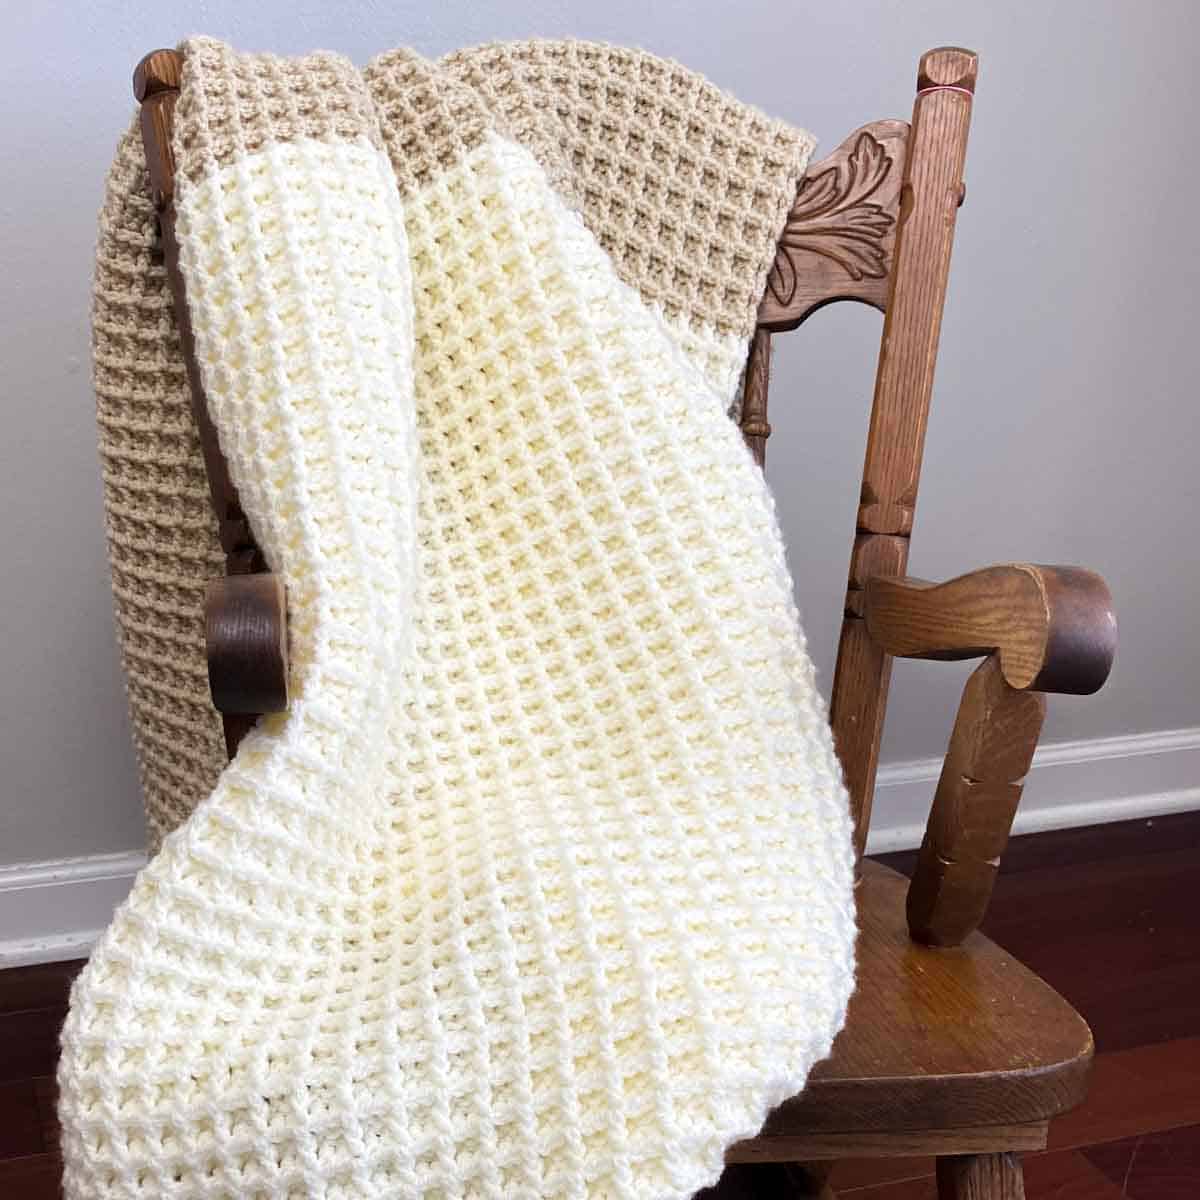 crochet waffle stitch blanket draped over a small rocking chair